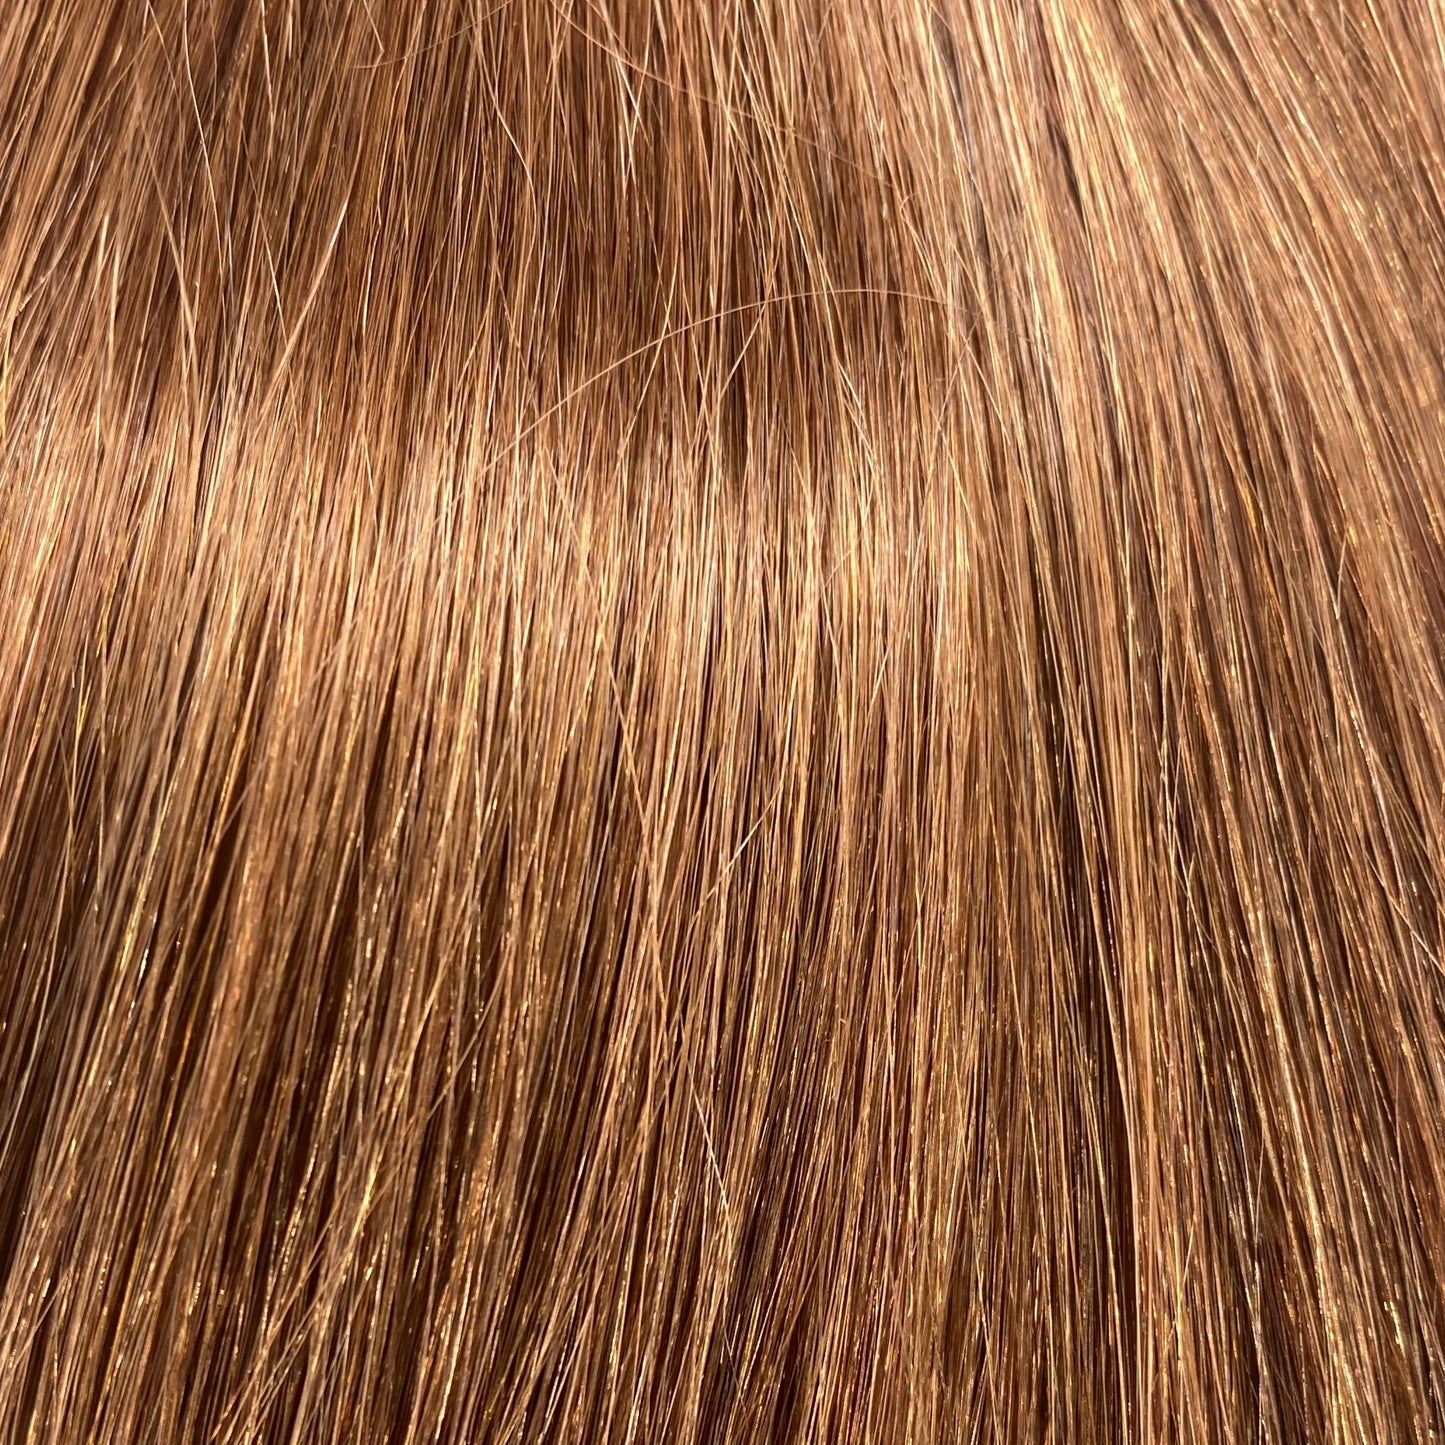 Velo #33 - 20 inches - Light Mahogany Chestnut Velo DR Hair Products Co 